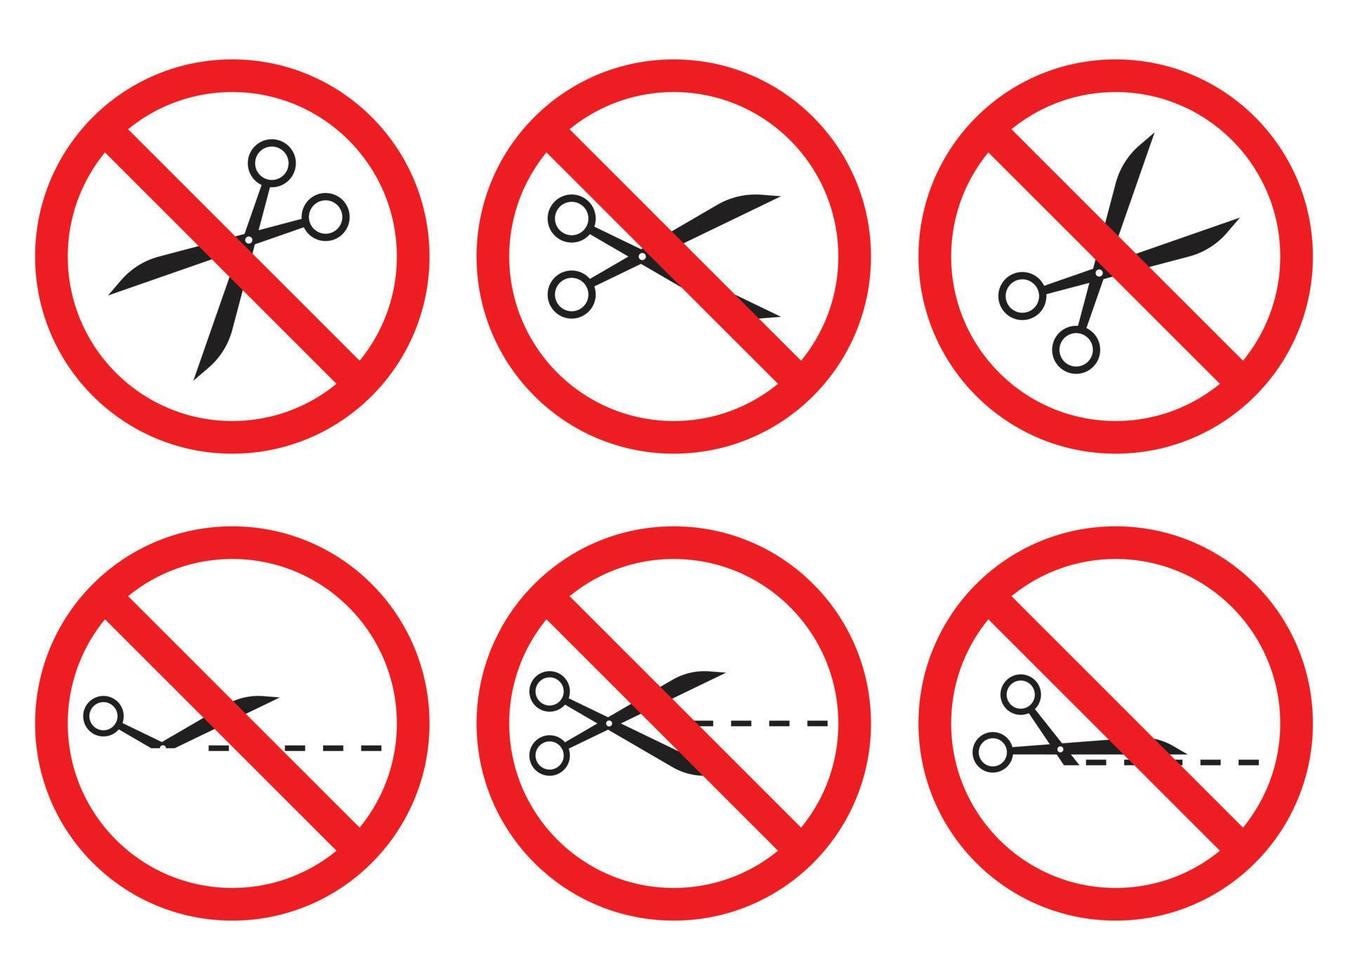 Do not open with scissors sign and symbol vector illustration collection